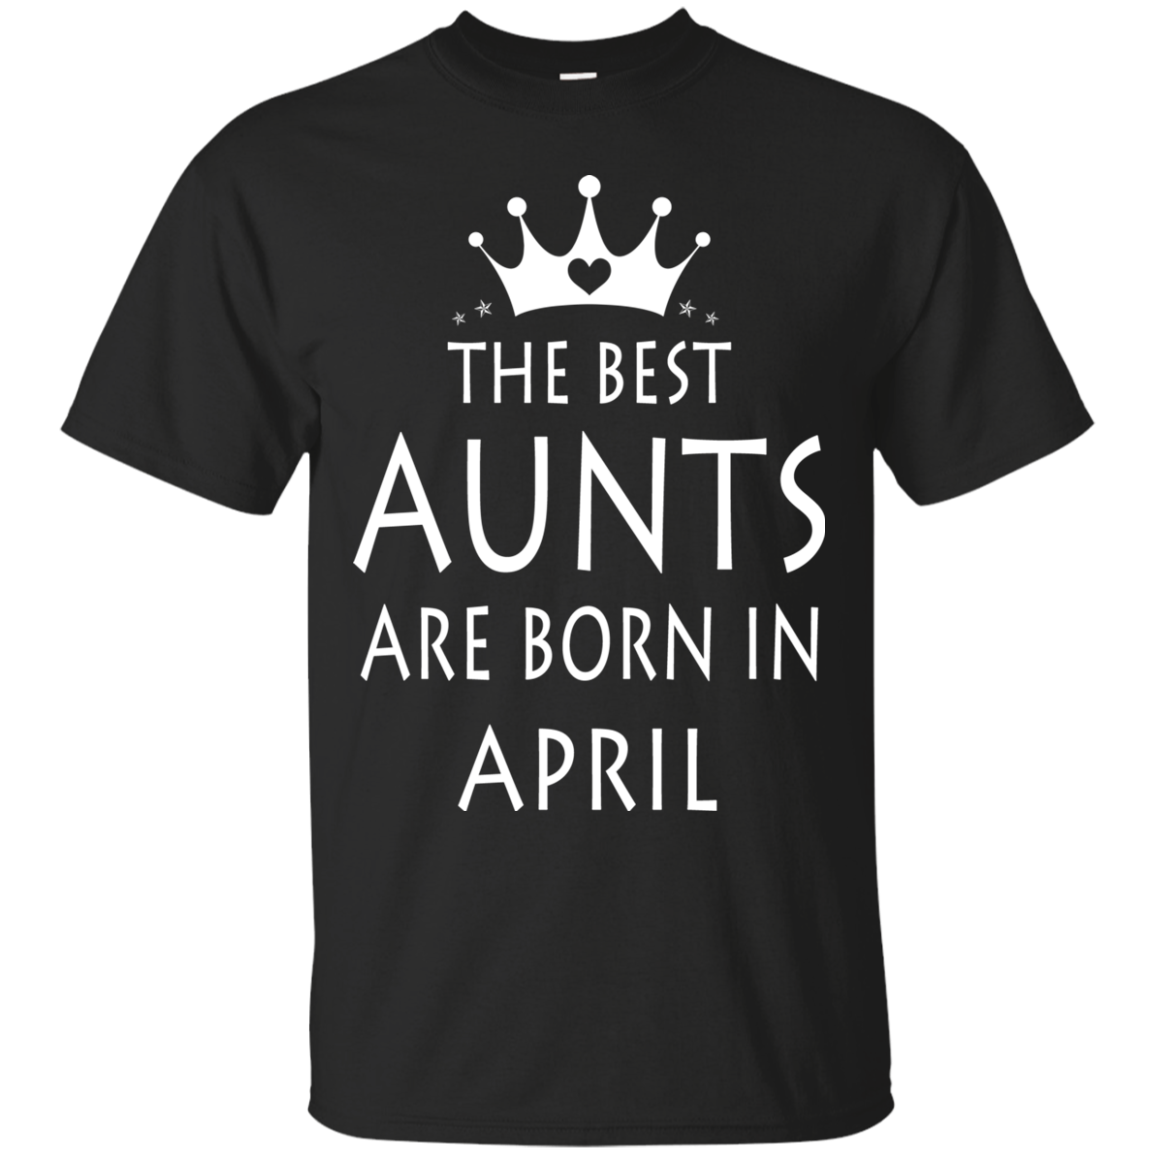 The best Aunts are born in April shirt, tank, sweater